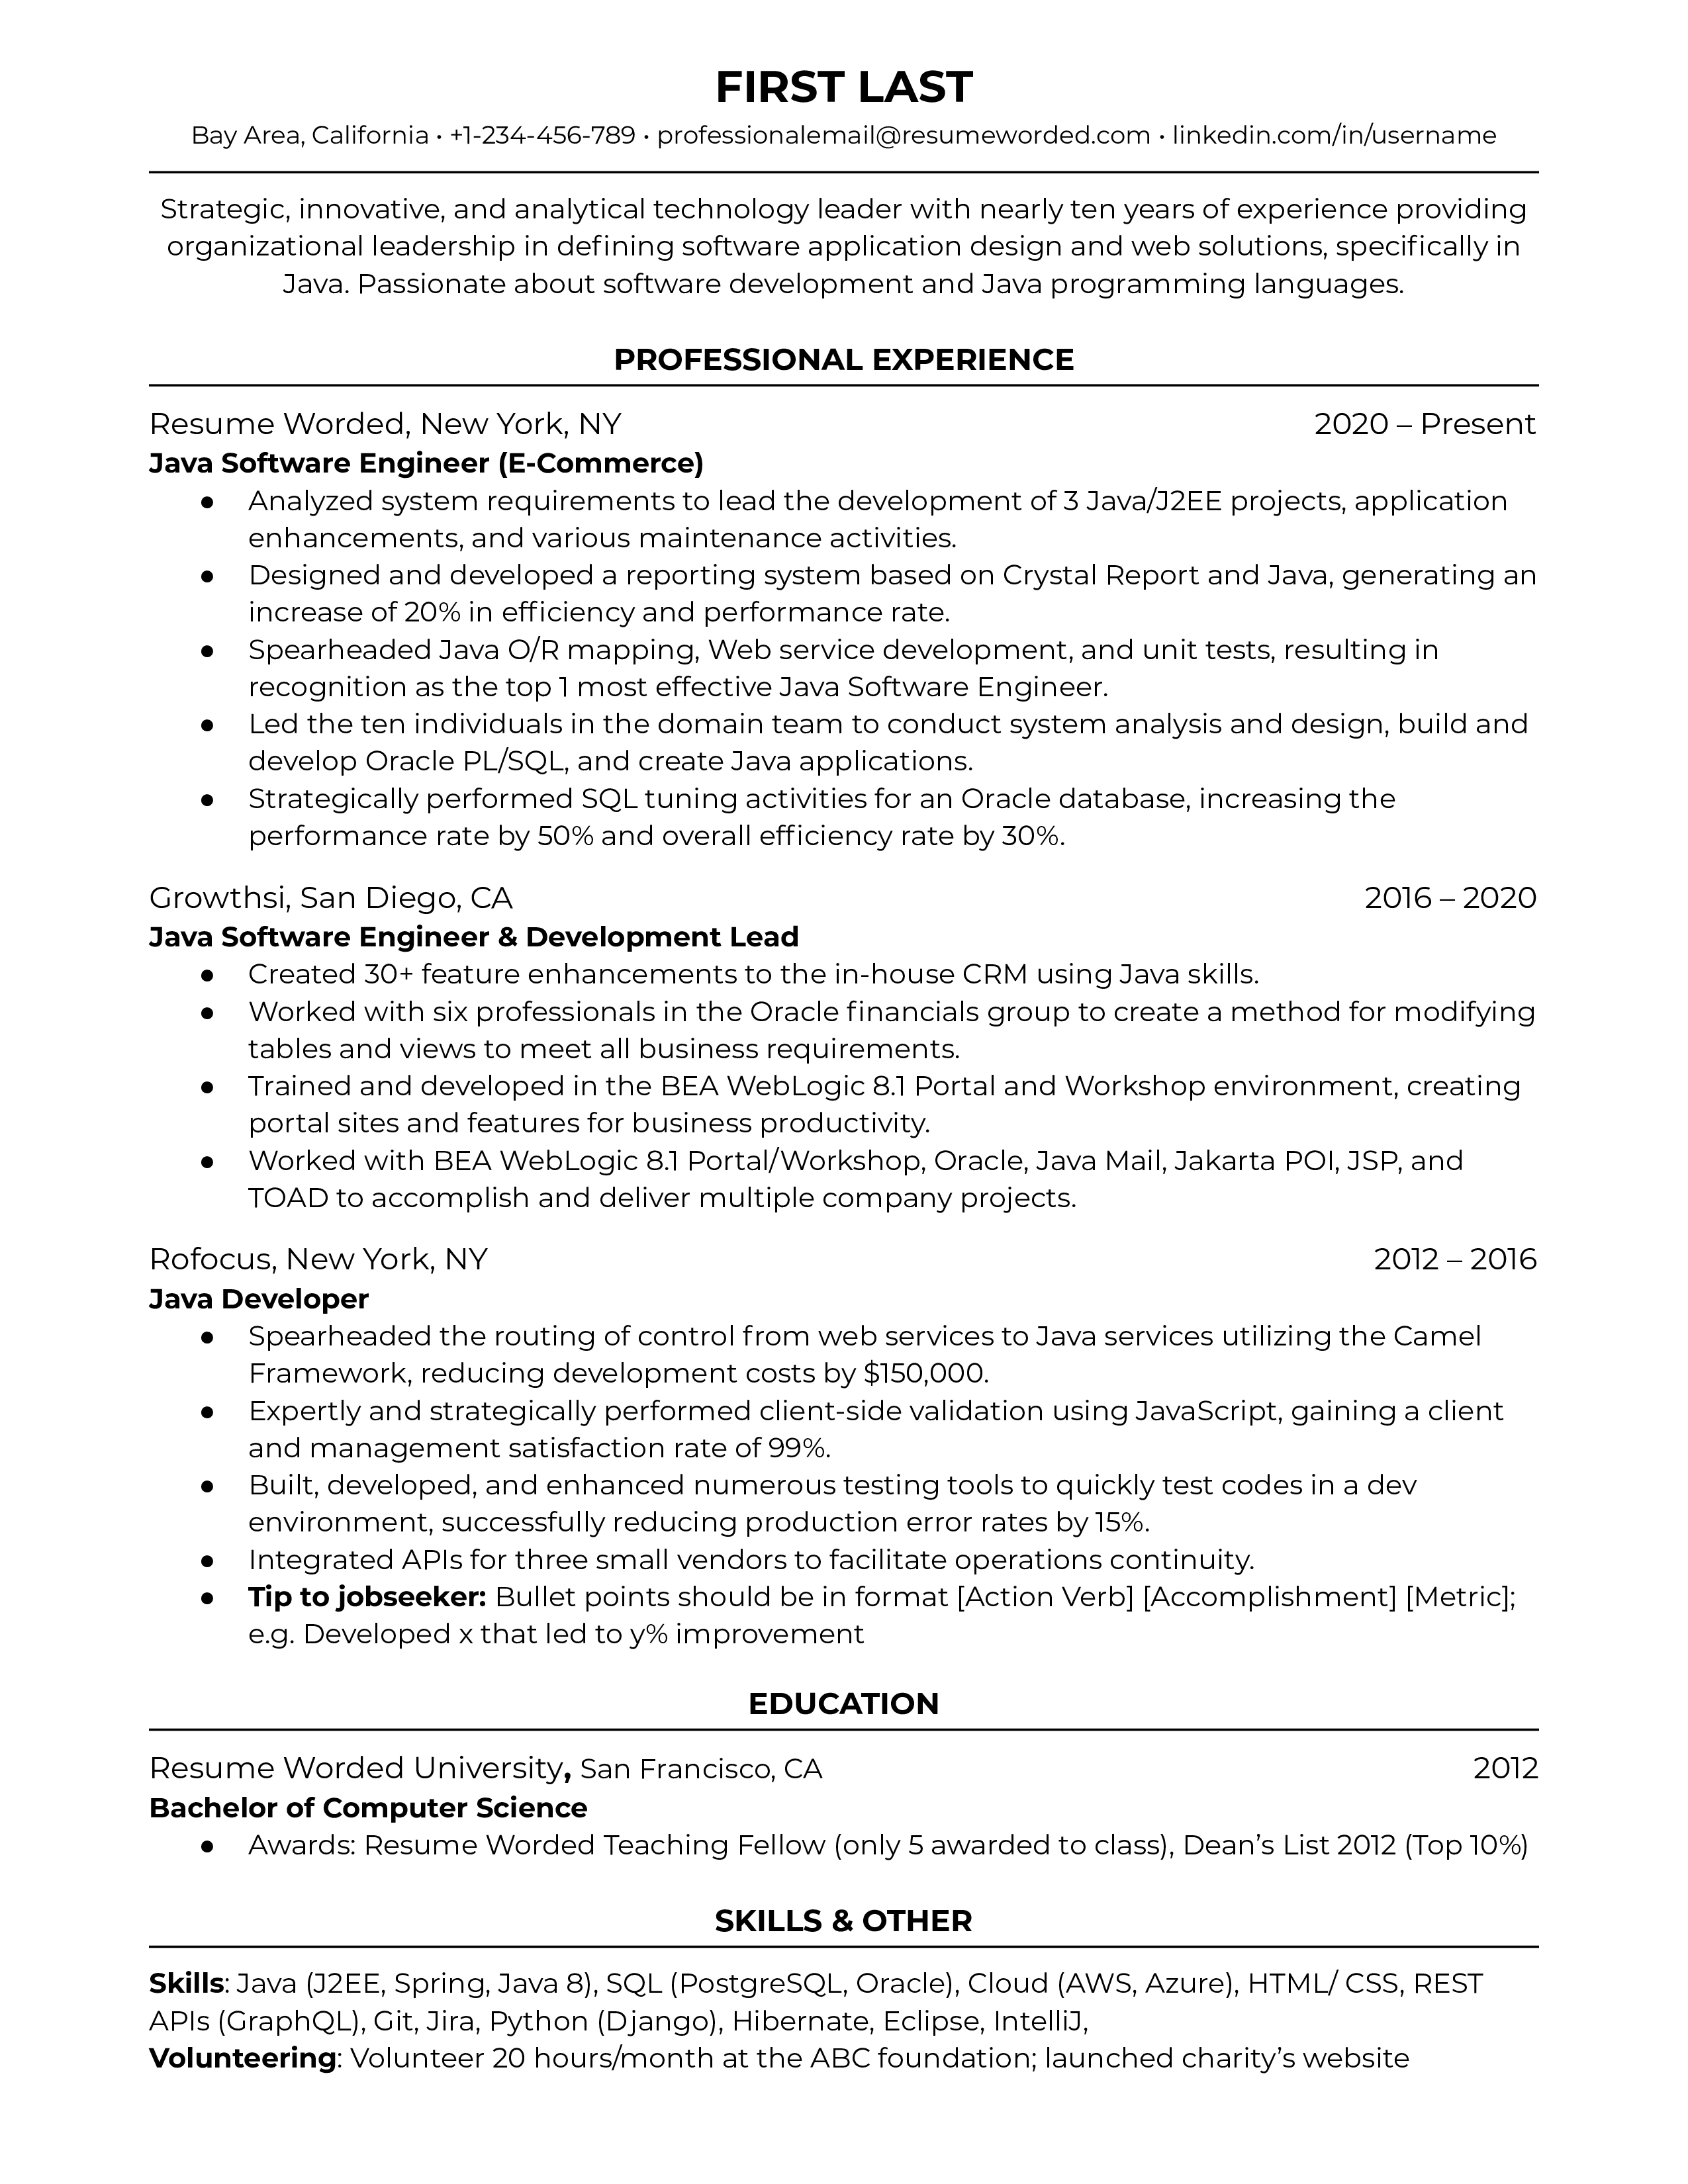 Screenshot of a well-structured CV for a Java Software Engineer role.